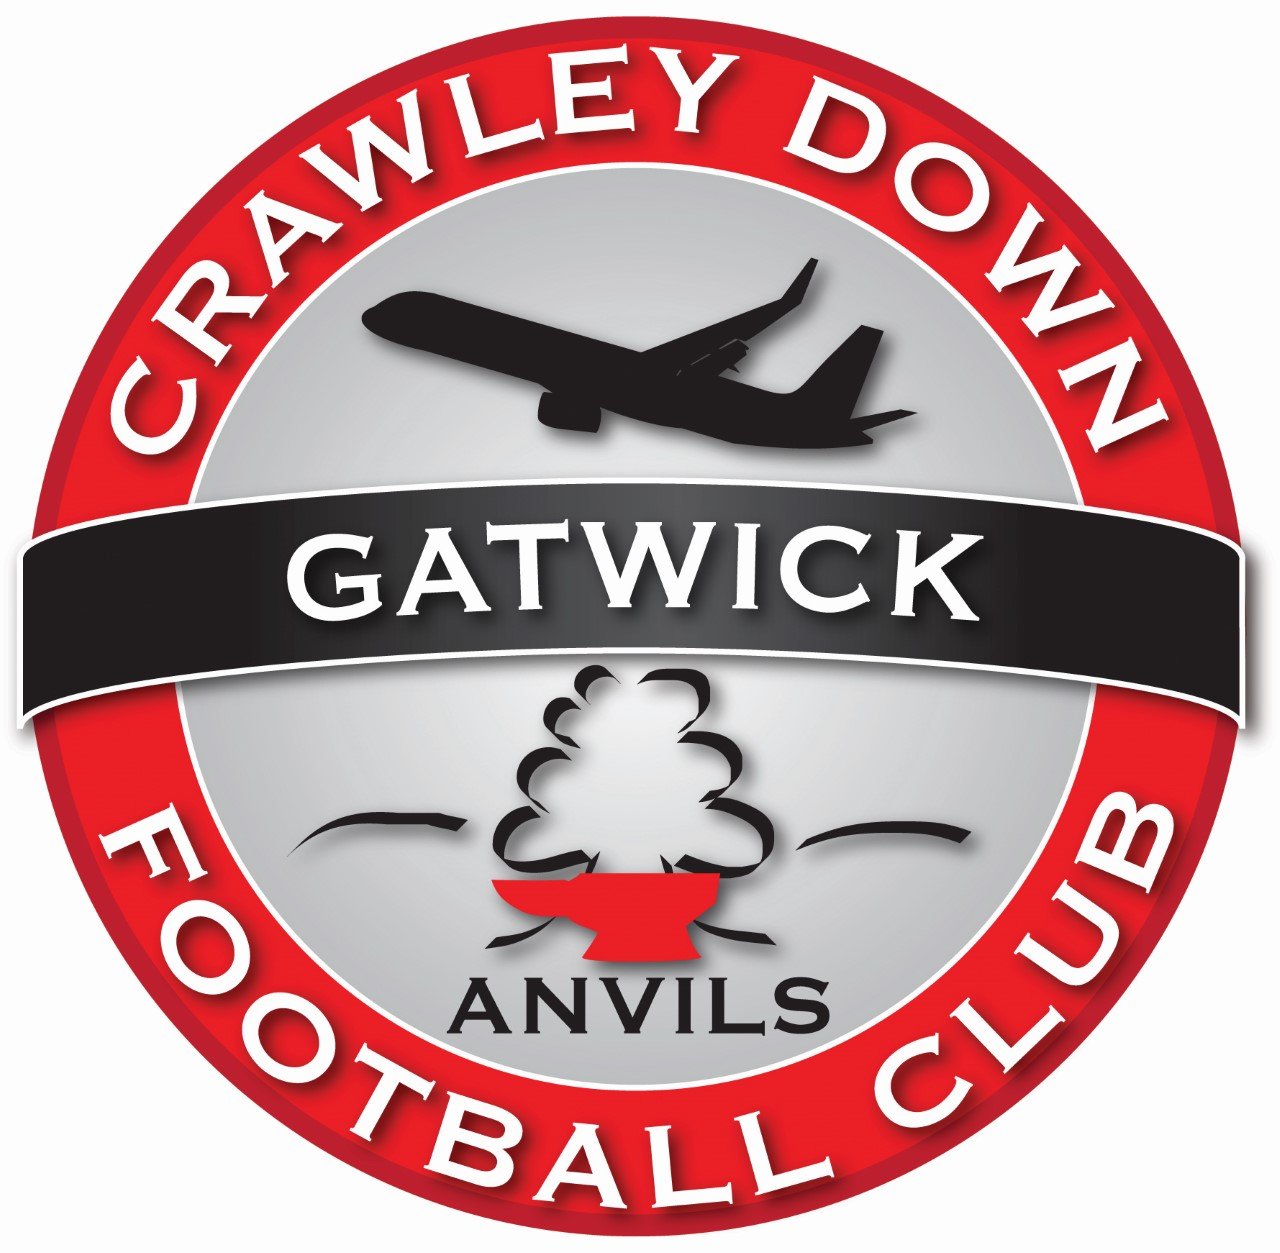 Crawley Down Gatwick FC - Girls Section. Teams from U8 to U14. Little Anvils section for 4 to 7 year olds.   https://t.co/ayA3RUq1UH